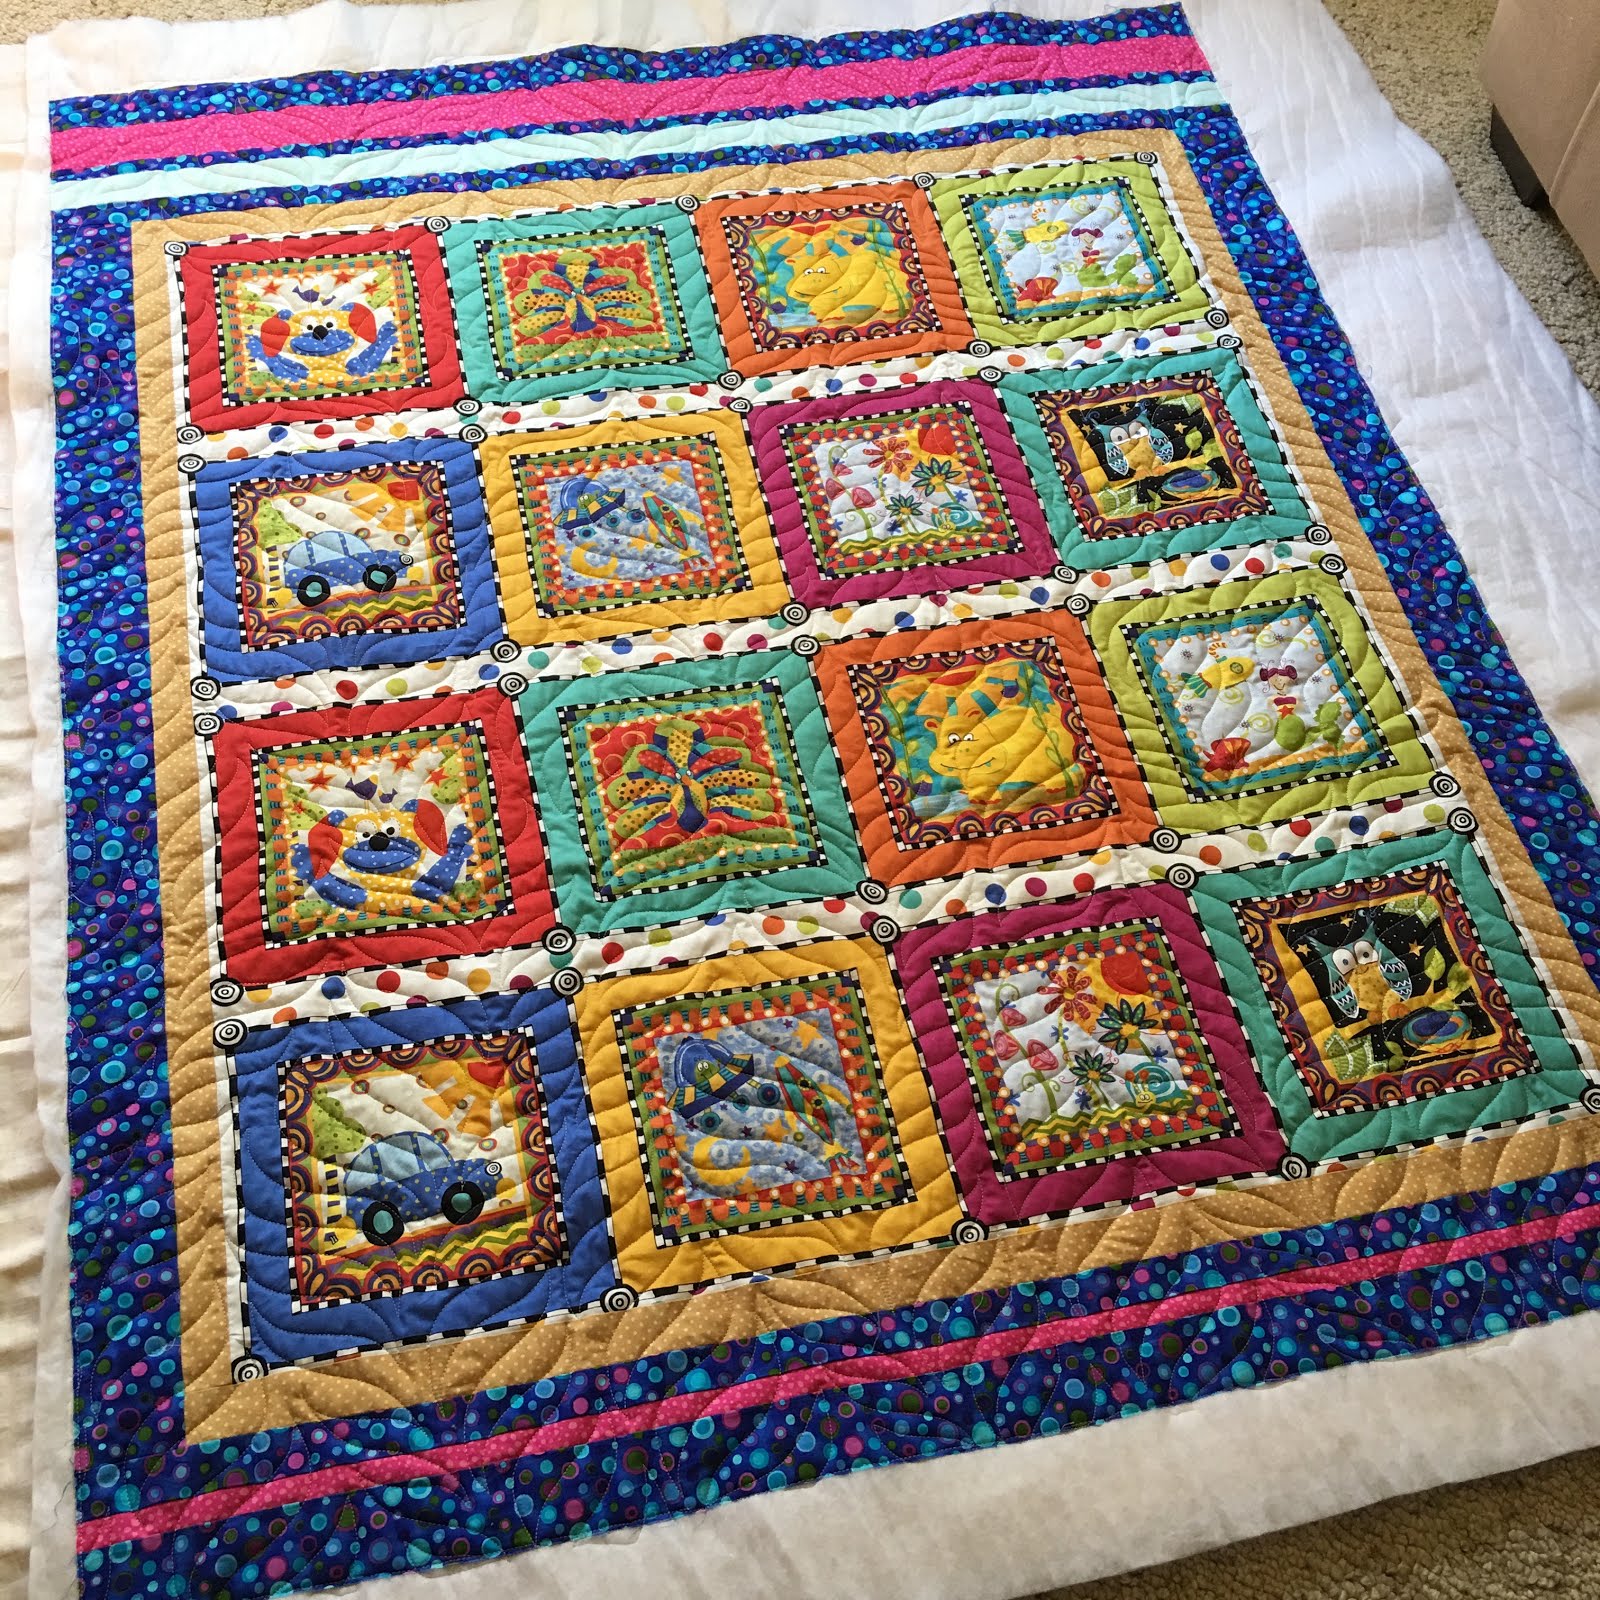 Can Babies Have A Quilt